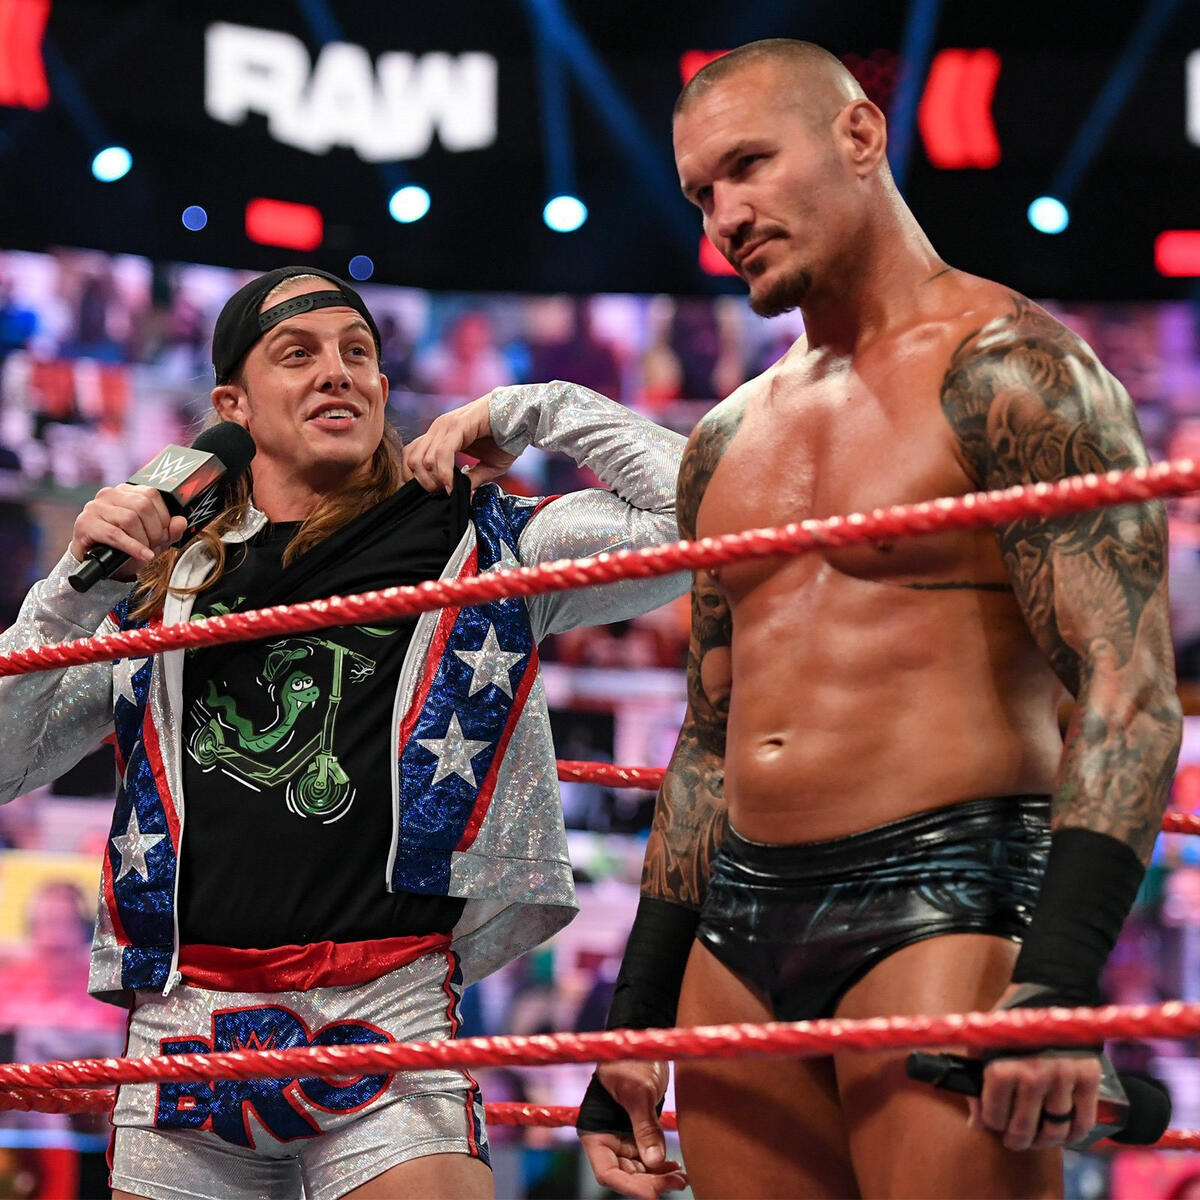 The Must See Images Of Raw June 7 21 Photos Wwe